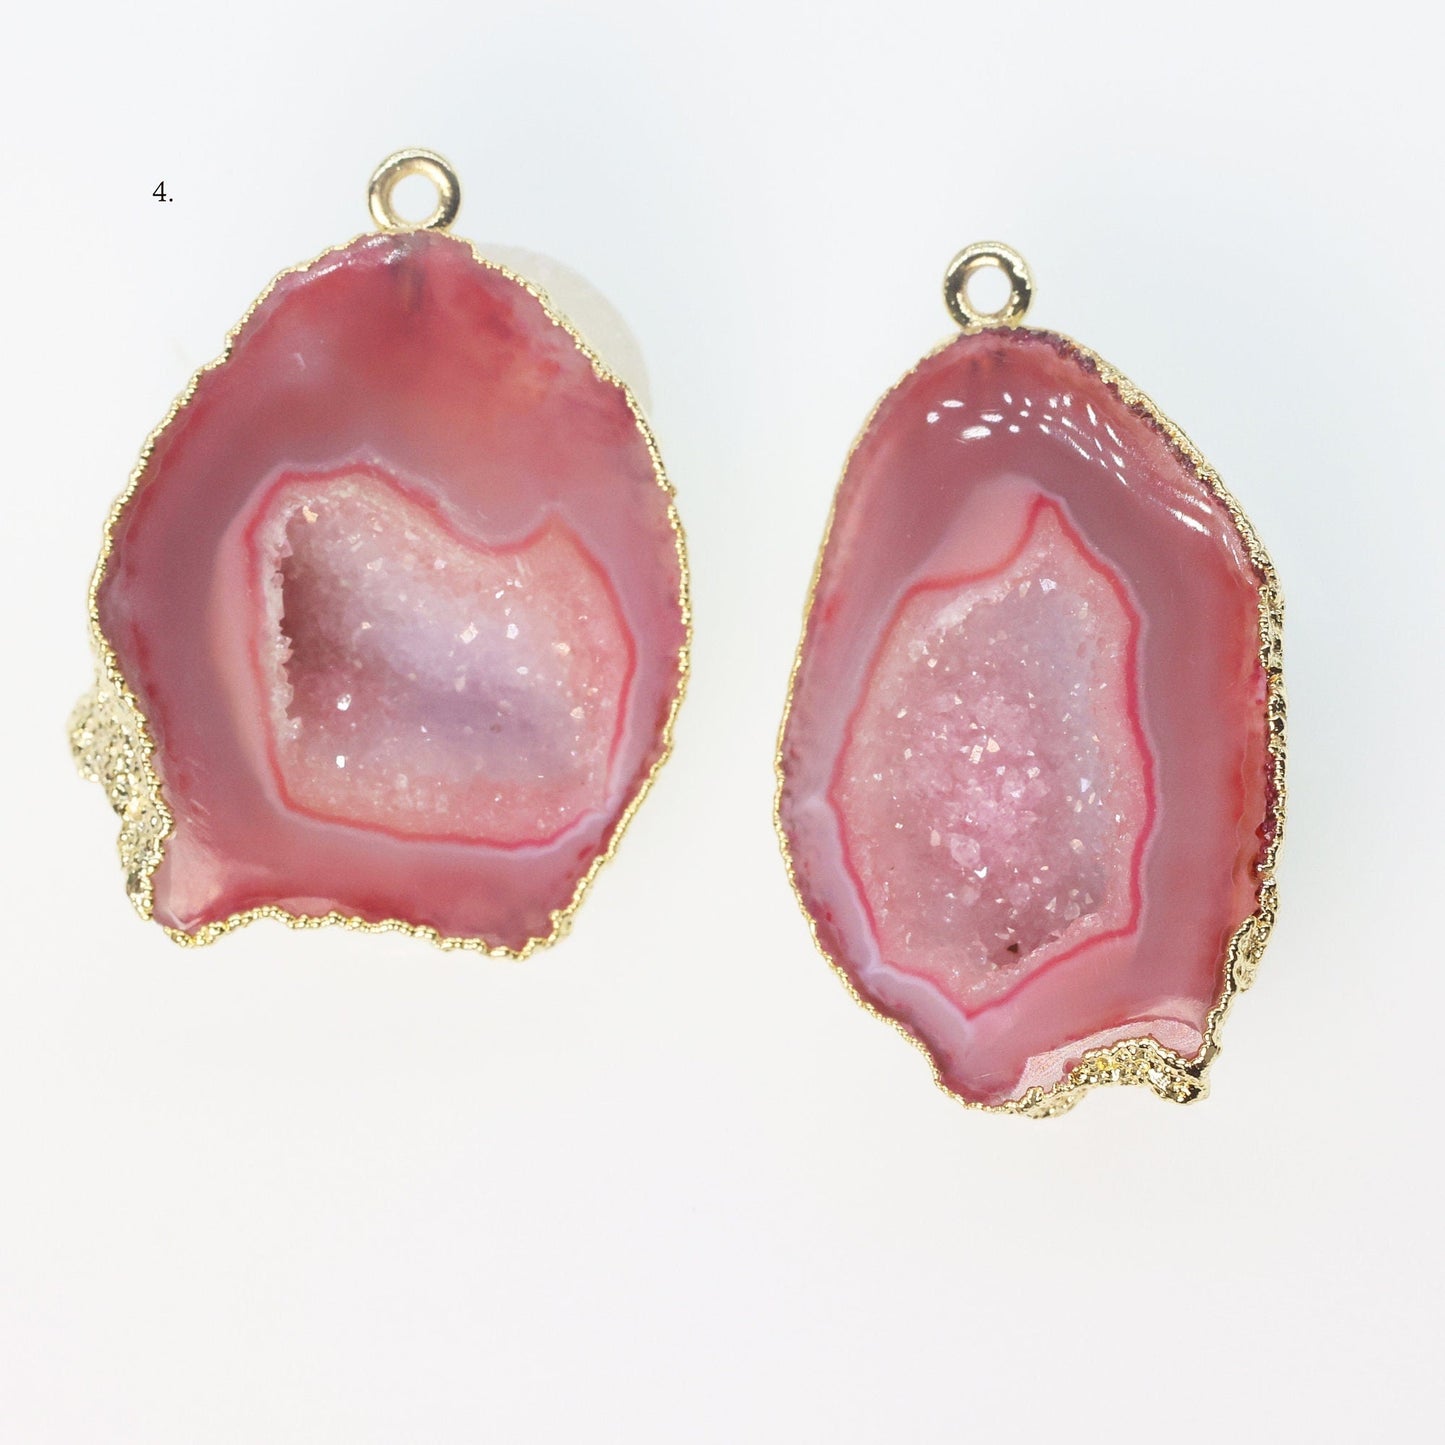 Gold Edged orange cave druzy or tobasco druzy geode Pairs For Earrings * Order Exact Pairs as in Photos* - Meena Design